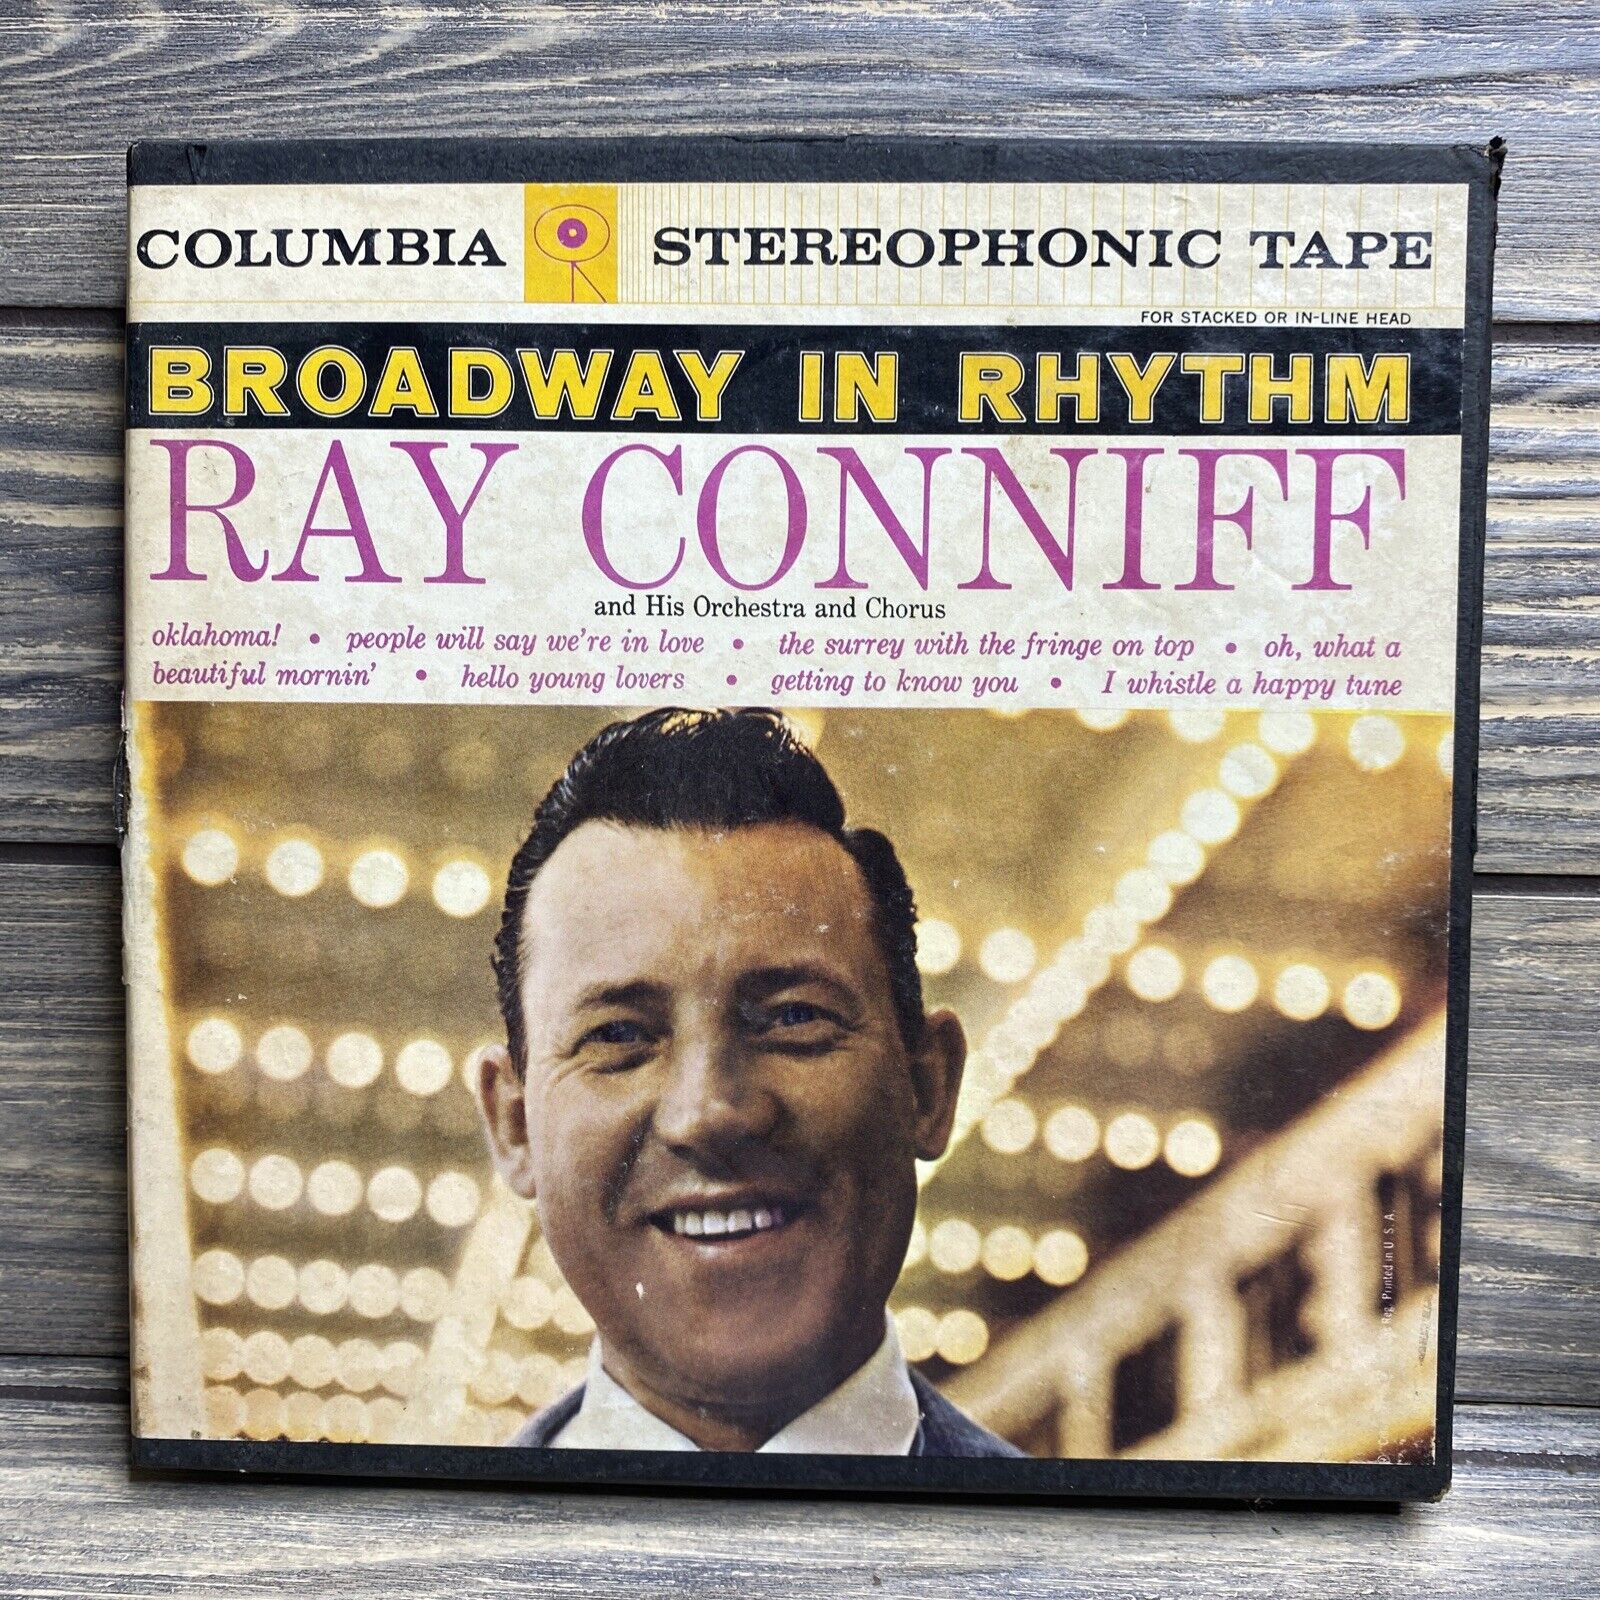 Vtg Stereophonic Tape Columbia Ray Conniff Broadway in Rhythm 4-Track 7.5 IPS